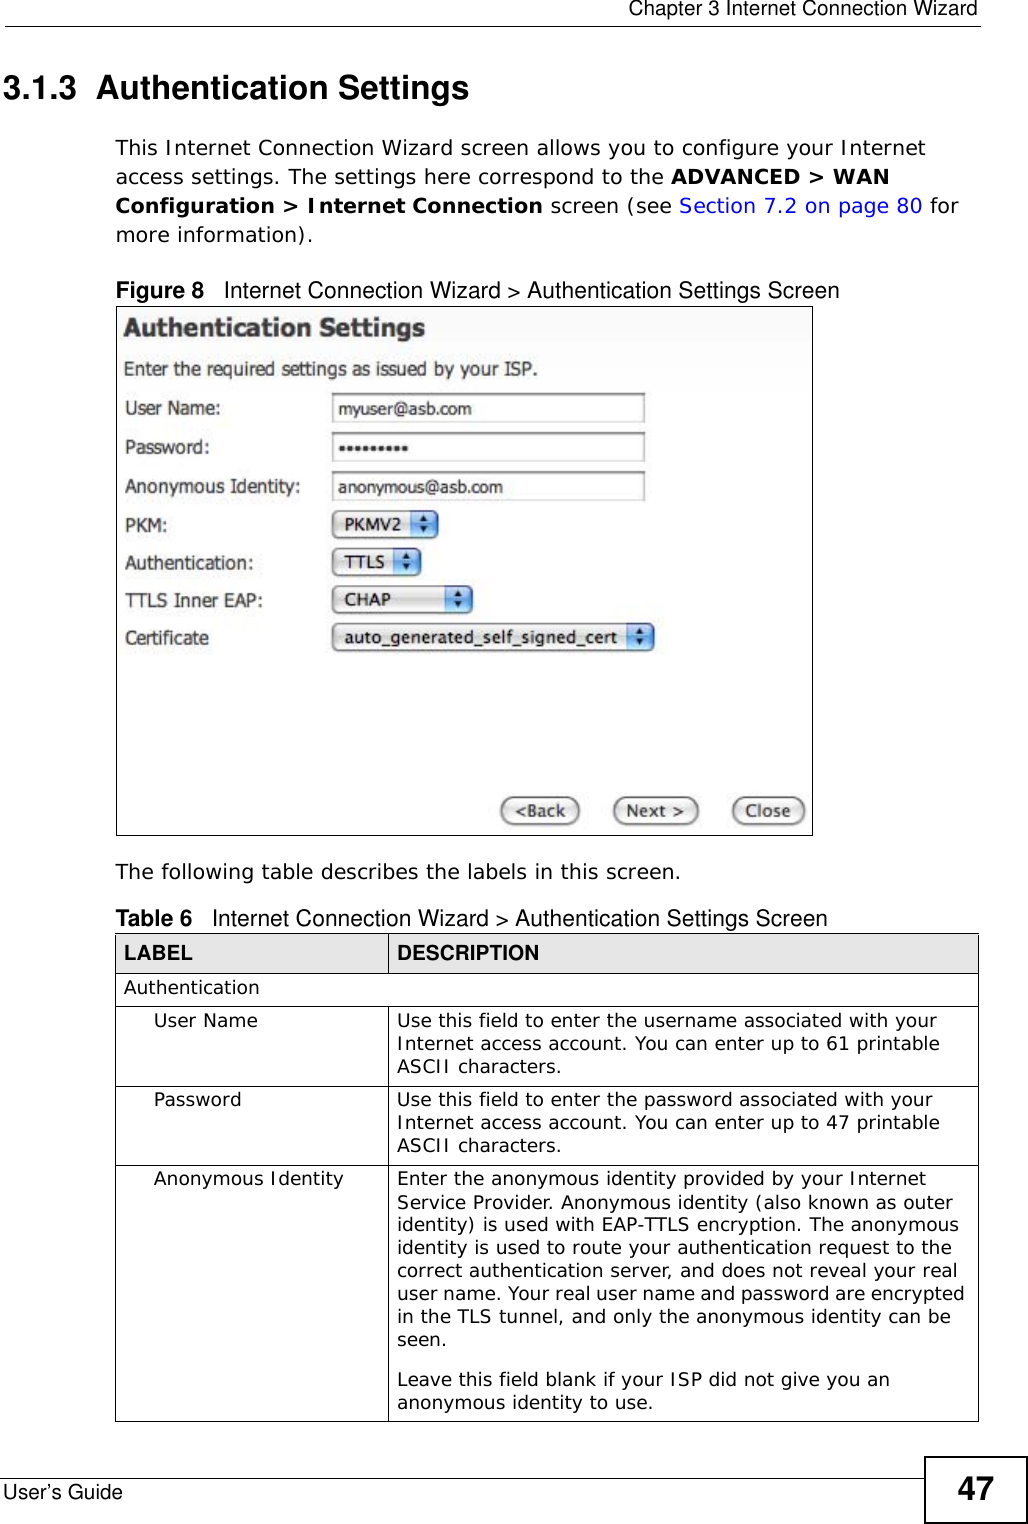  Chapter 3 Internet Connection WizardUser’s Guide 473.1.3  Authentication SettingsThis Internet Connection Wizard screen allows you to configure your Internet access settings. The settings here correspond to the ADVANCED &gt; WAN Configuration &gt; Internet Connection screen (see Section 7.2 on page 80 for more information).Figure 8   Internet Connection Wizard &gt; Authentication Settings ScreenThe following table describes the labels in this screen.Table 6   Internet Connection Wizard &gt; Authentication Settings ScreenLABEL DESCRIPTIONAuthenticationUser Name Use this field to enter the username associated with your Internet access account. You can enter up to 61 printable ASCII characters.Password Use this field to enter the password associated with your Internet access account. You can enter up to 47 printable ASCII characters.Anonymous Identity Enter the anonymous identity provided by your Internet Service Provider. Anonymous identity (also known as outer identity) is used with EAP-TTLS encryption. The anonymous identity is used to route your authentication request to the correct authentication server, and does not reveal your real user name. Your real user name and password are encrypted in the TLS tunnel, and only the anonymous identity can be seen.Leave this field blank if your ISP did not give you an anonymous identity to use.